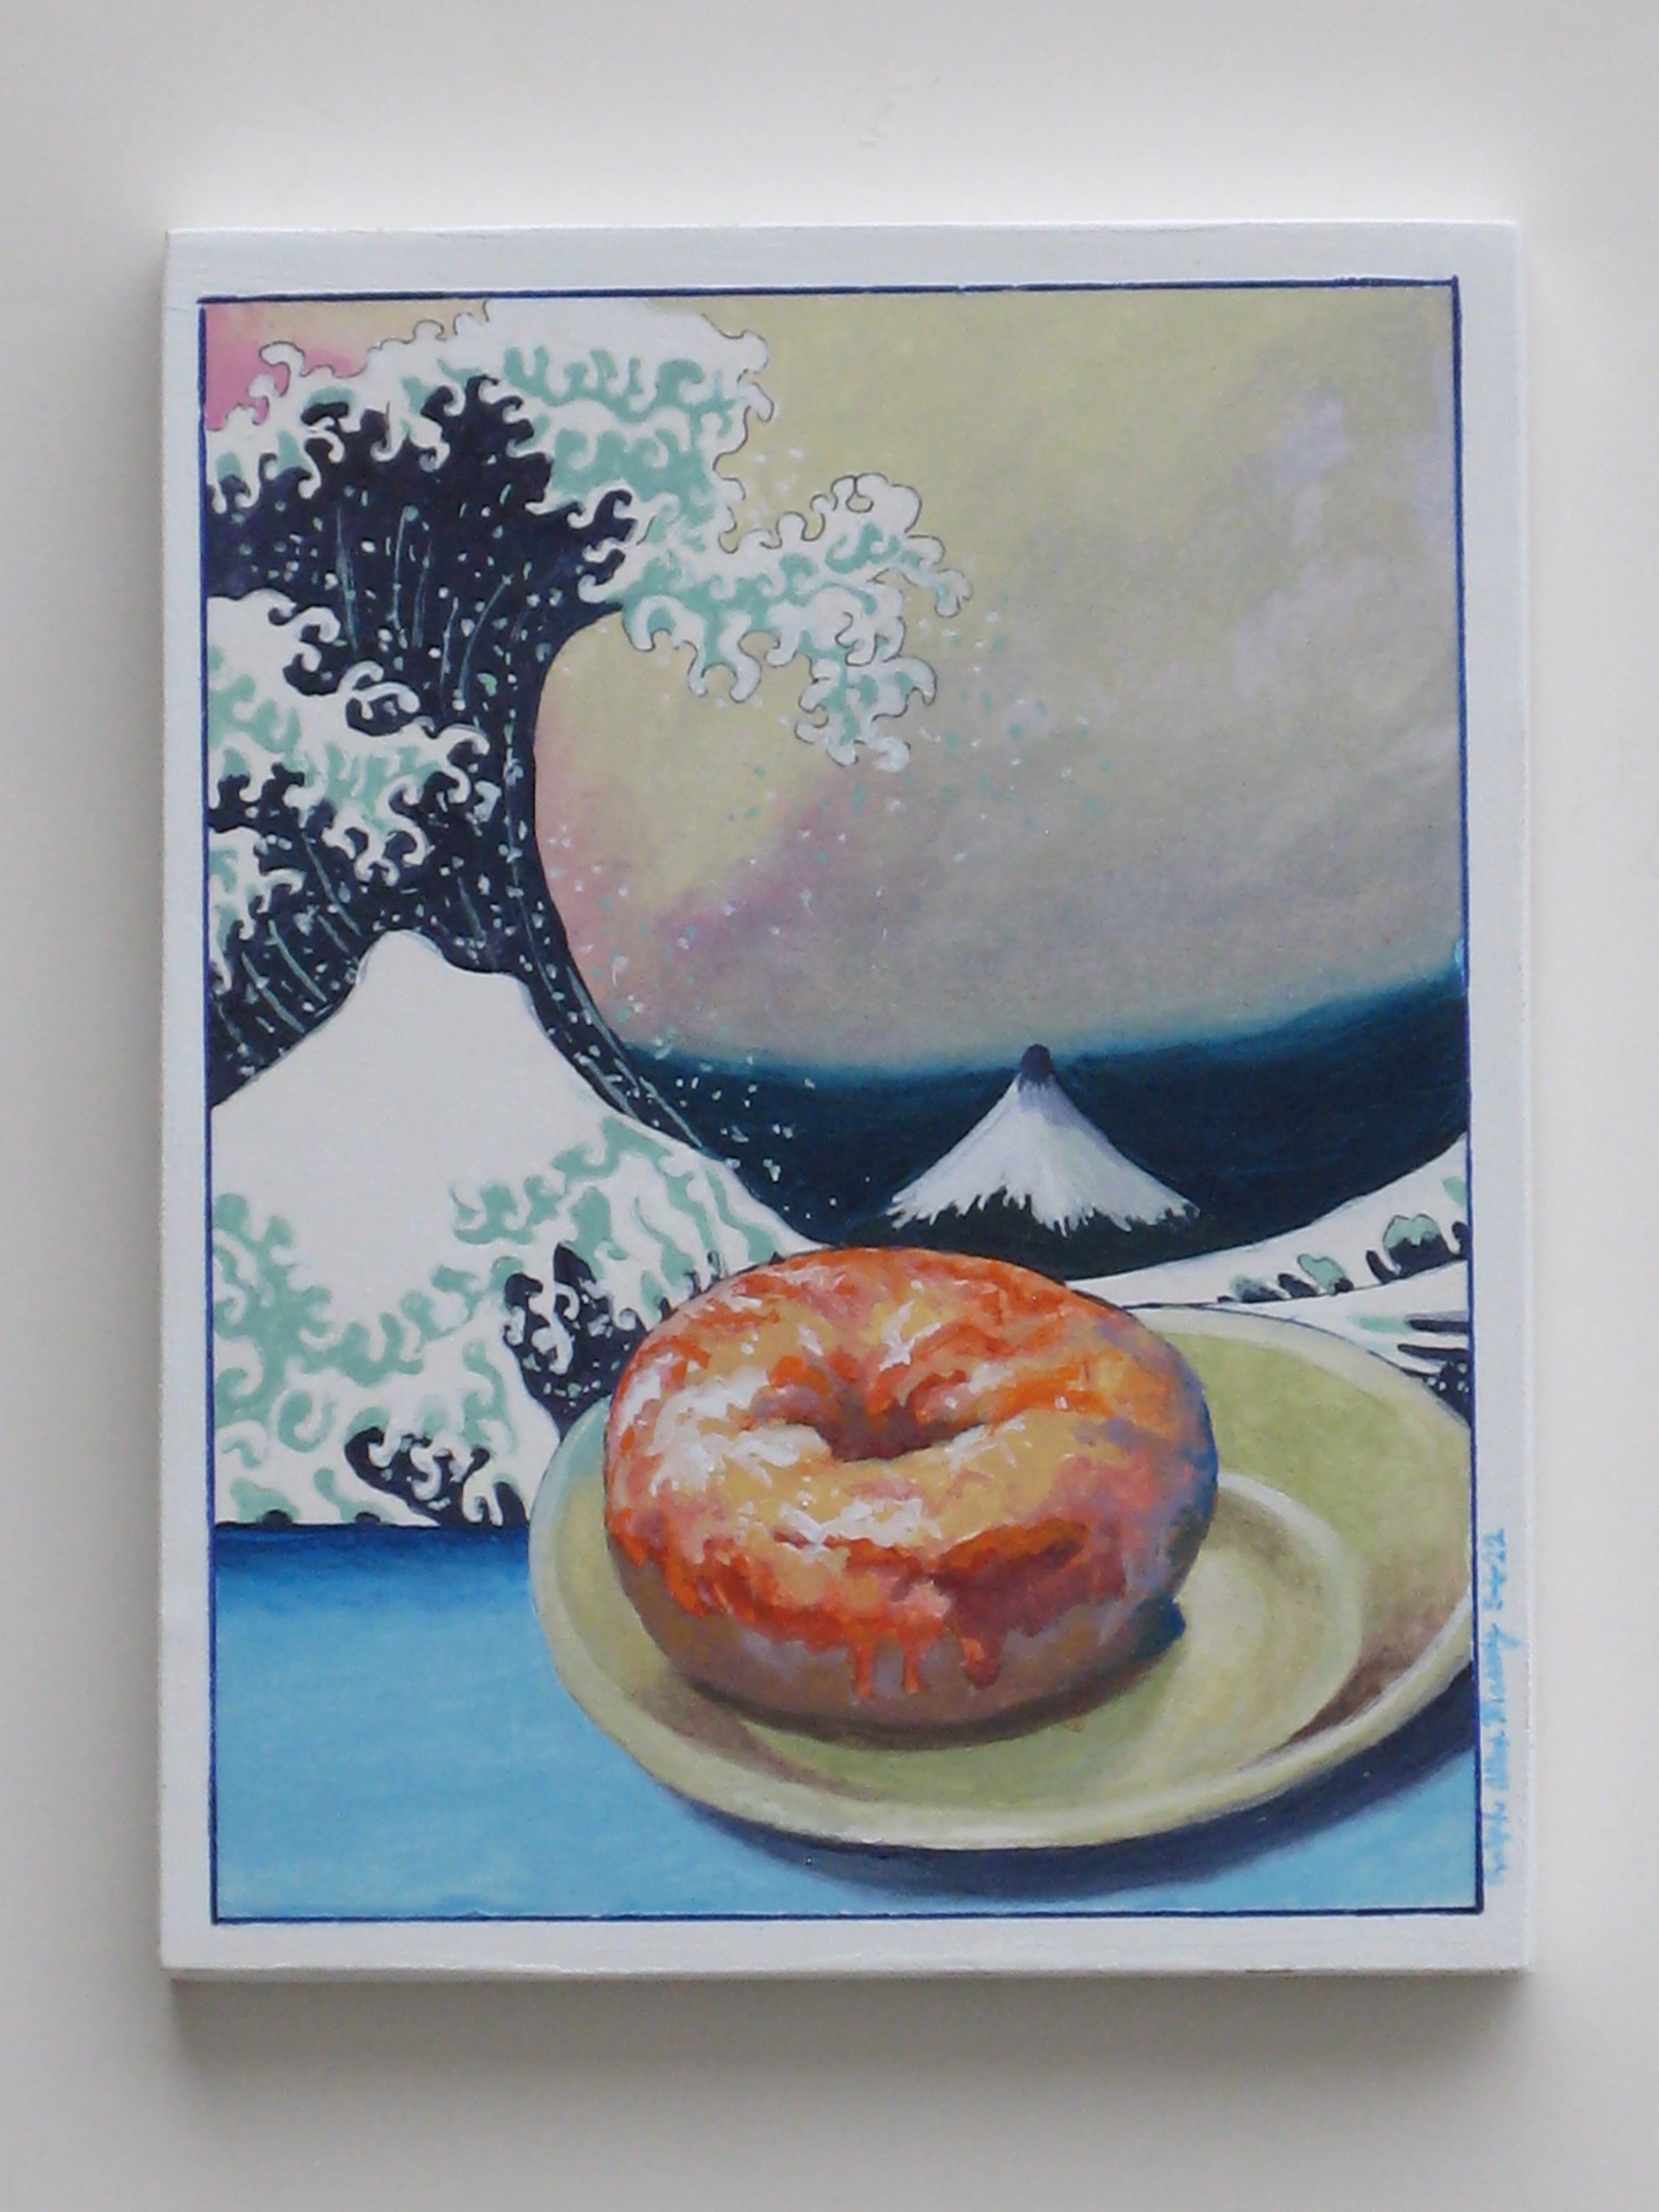 The Great Wave with Donut #1 by Ralph Allen Massey